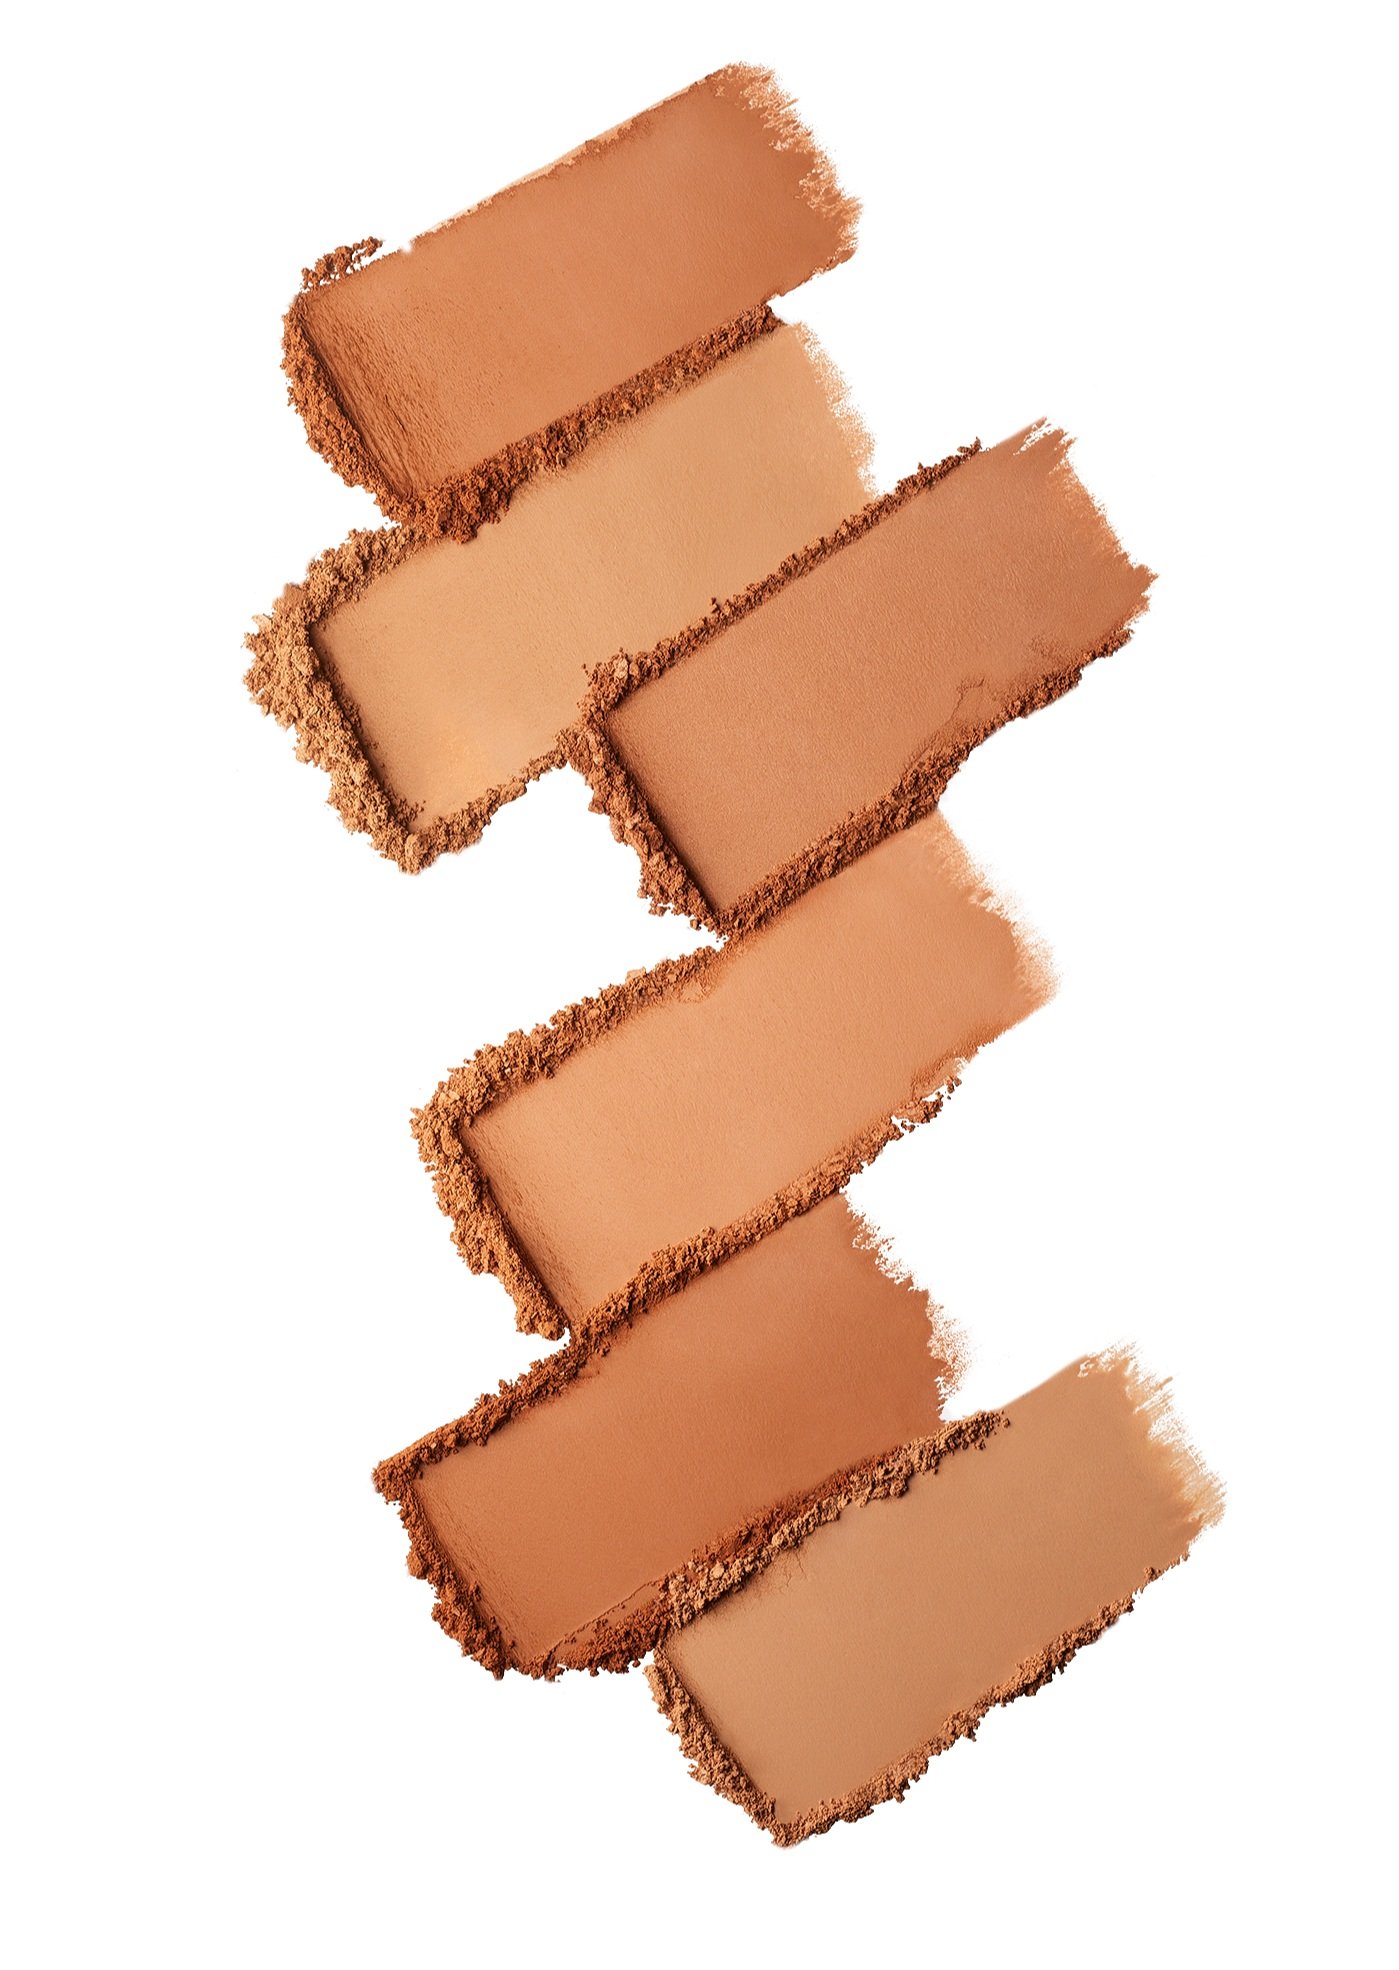 Sephora_SSB_Collection_Texture_Two_045_None.png